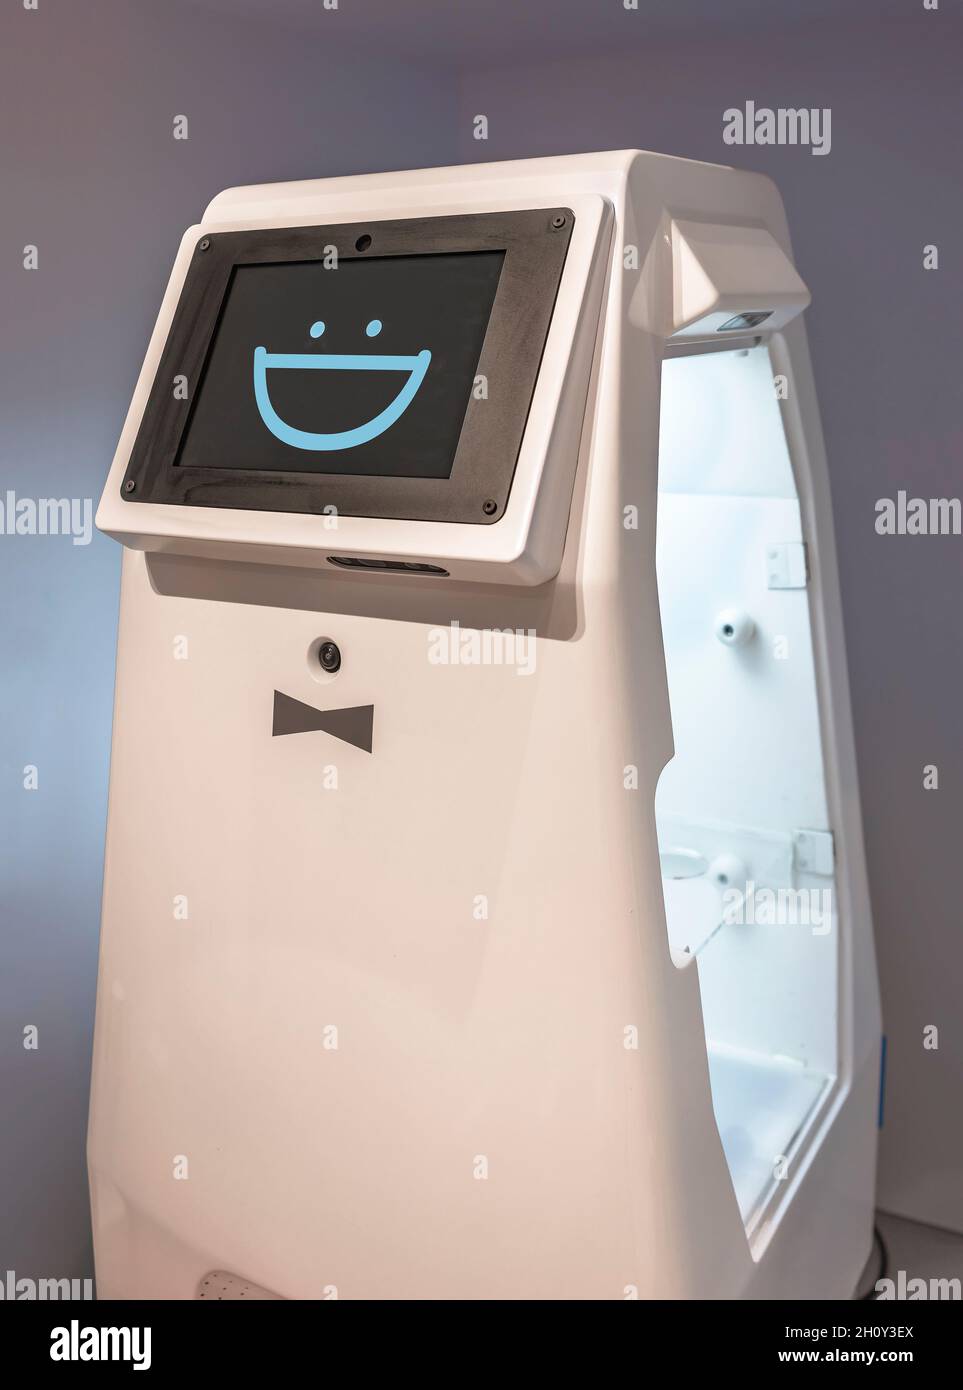 tokyo, japan - august 30 2021: Waiter service robot called MELBot developed by Mitsubishi Electric integrating Internet of Things technology to help w Stock Photo